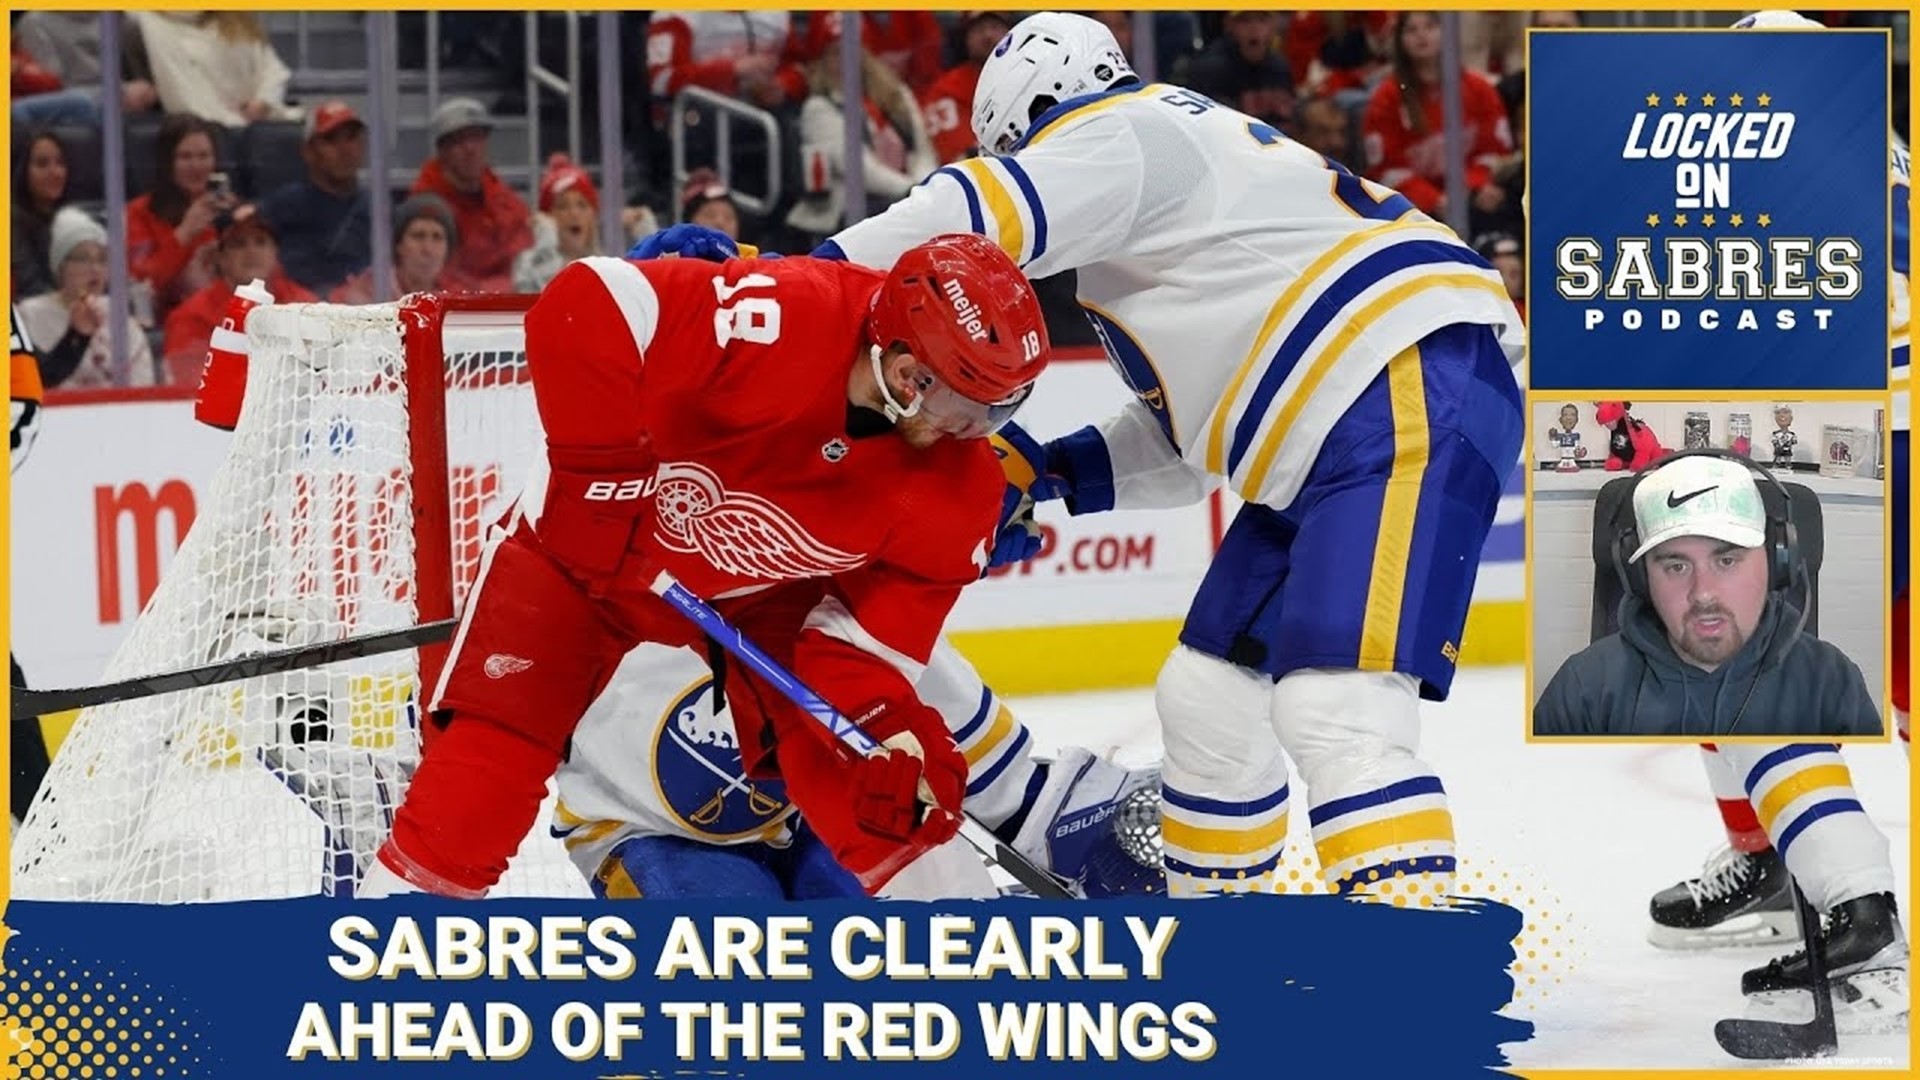 Looks like Devon Levi will once again play, this time in Detroit on Thursday night. Sneaky Joe previews the matchup with the Red Wings, including Sneaky Good Bets fe